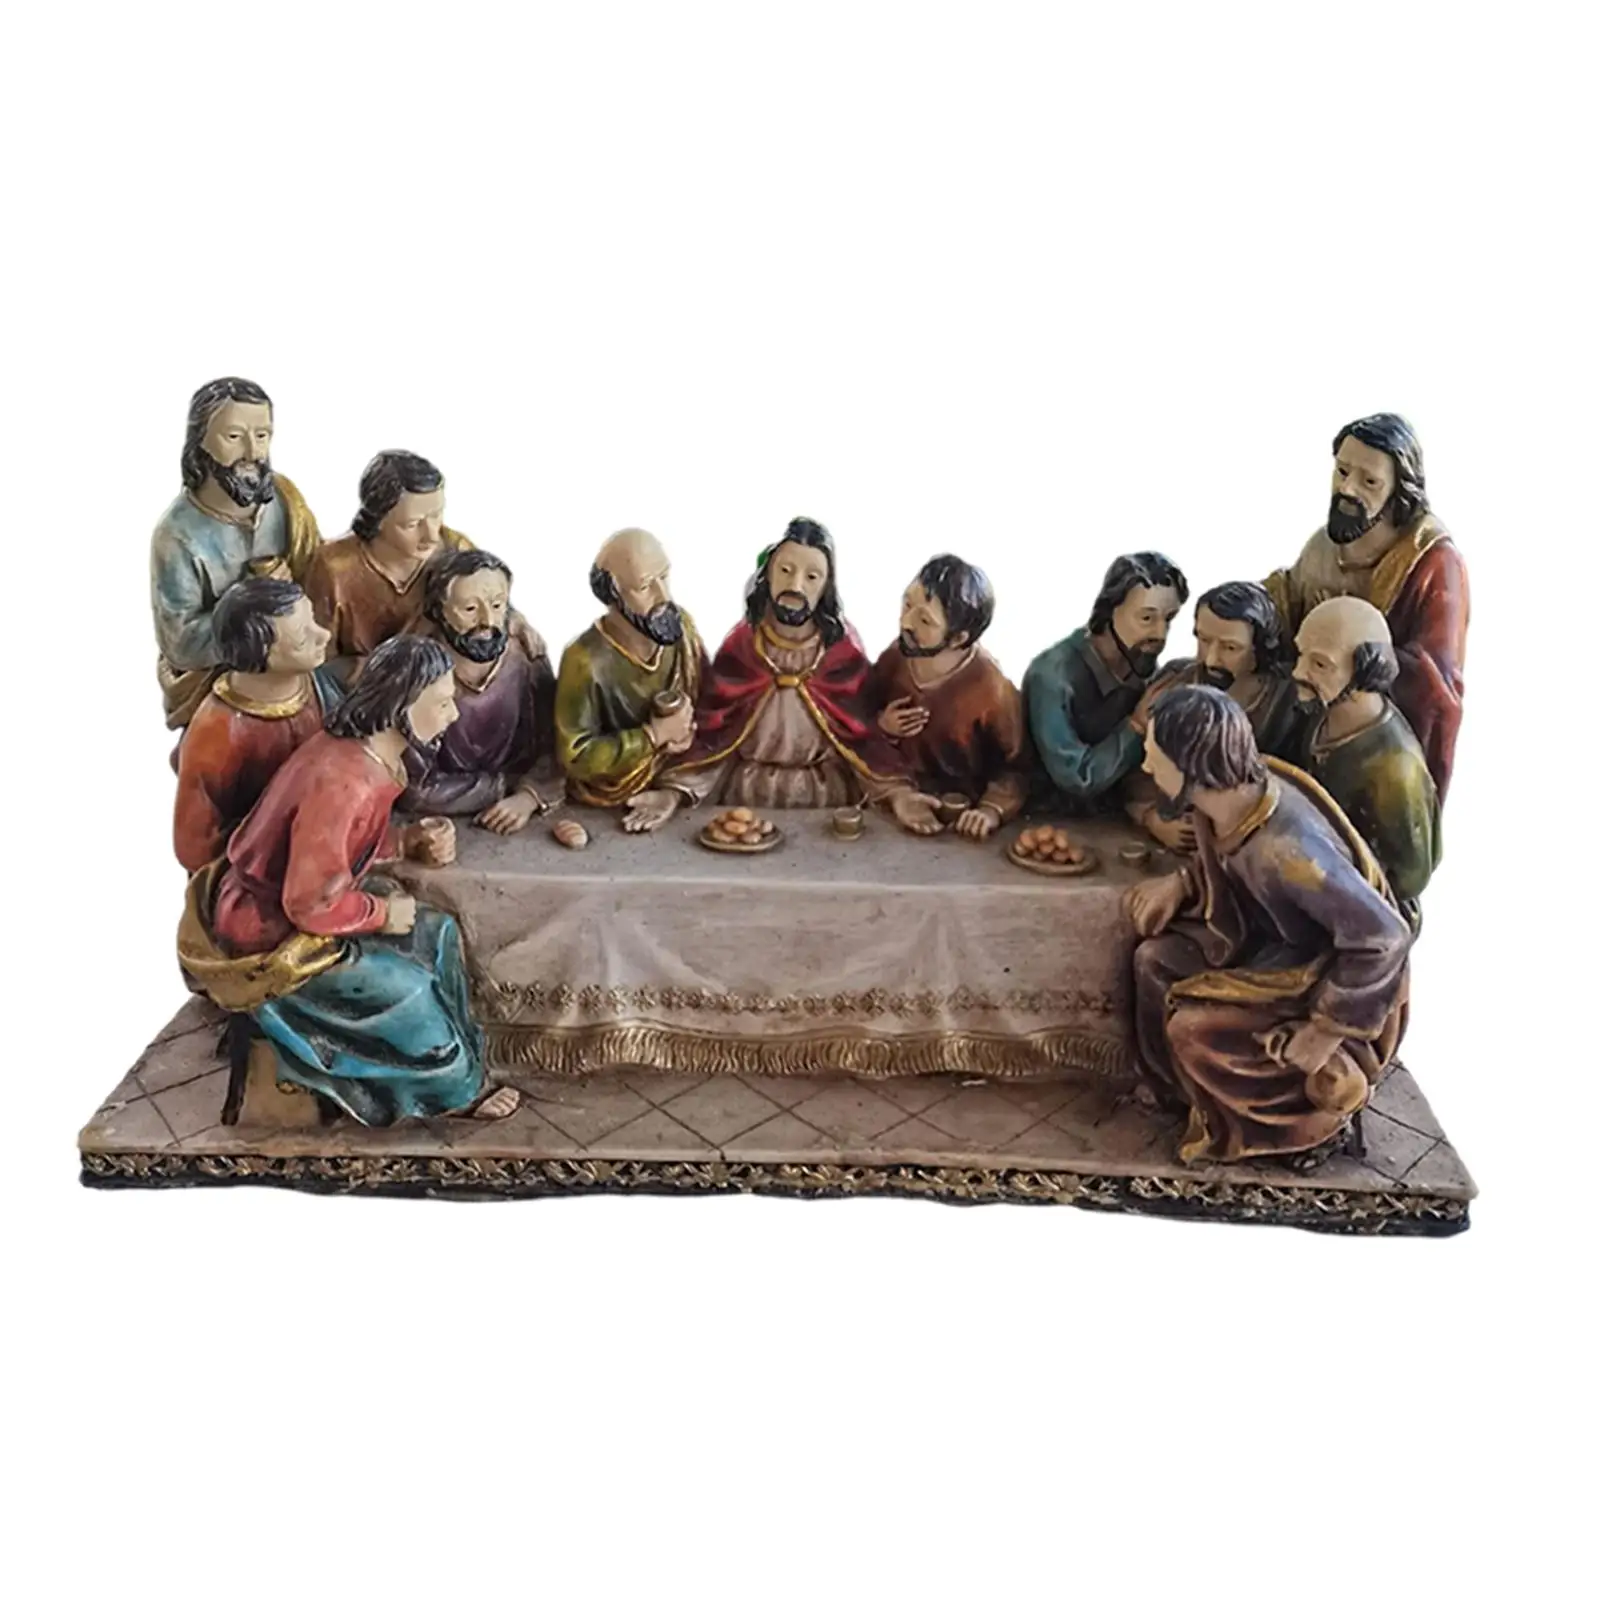 Resin The Last Supper Decorative Statue The Last Supper Scene for Bedroom Office Decor Ornaments Collection Gifts